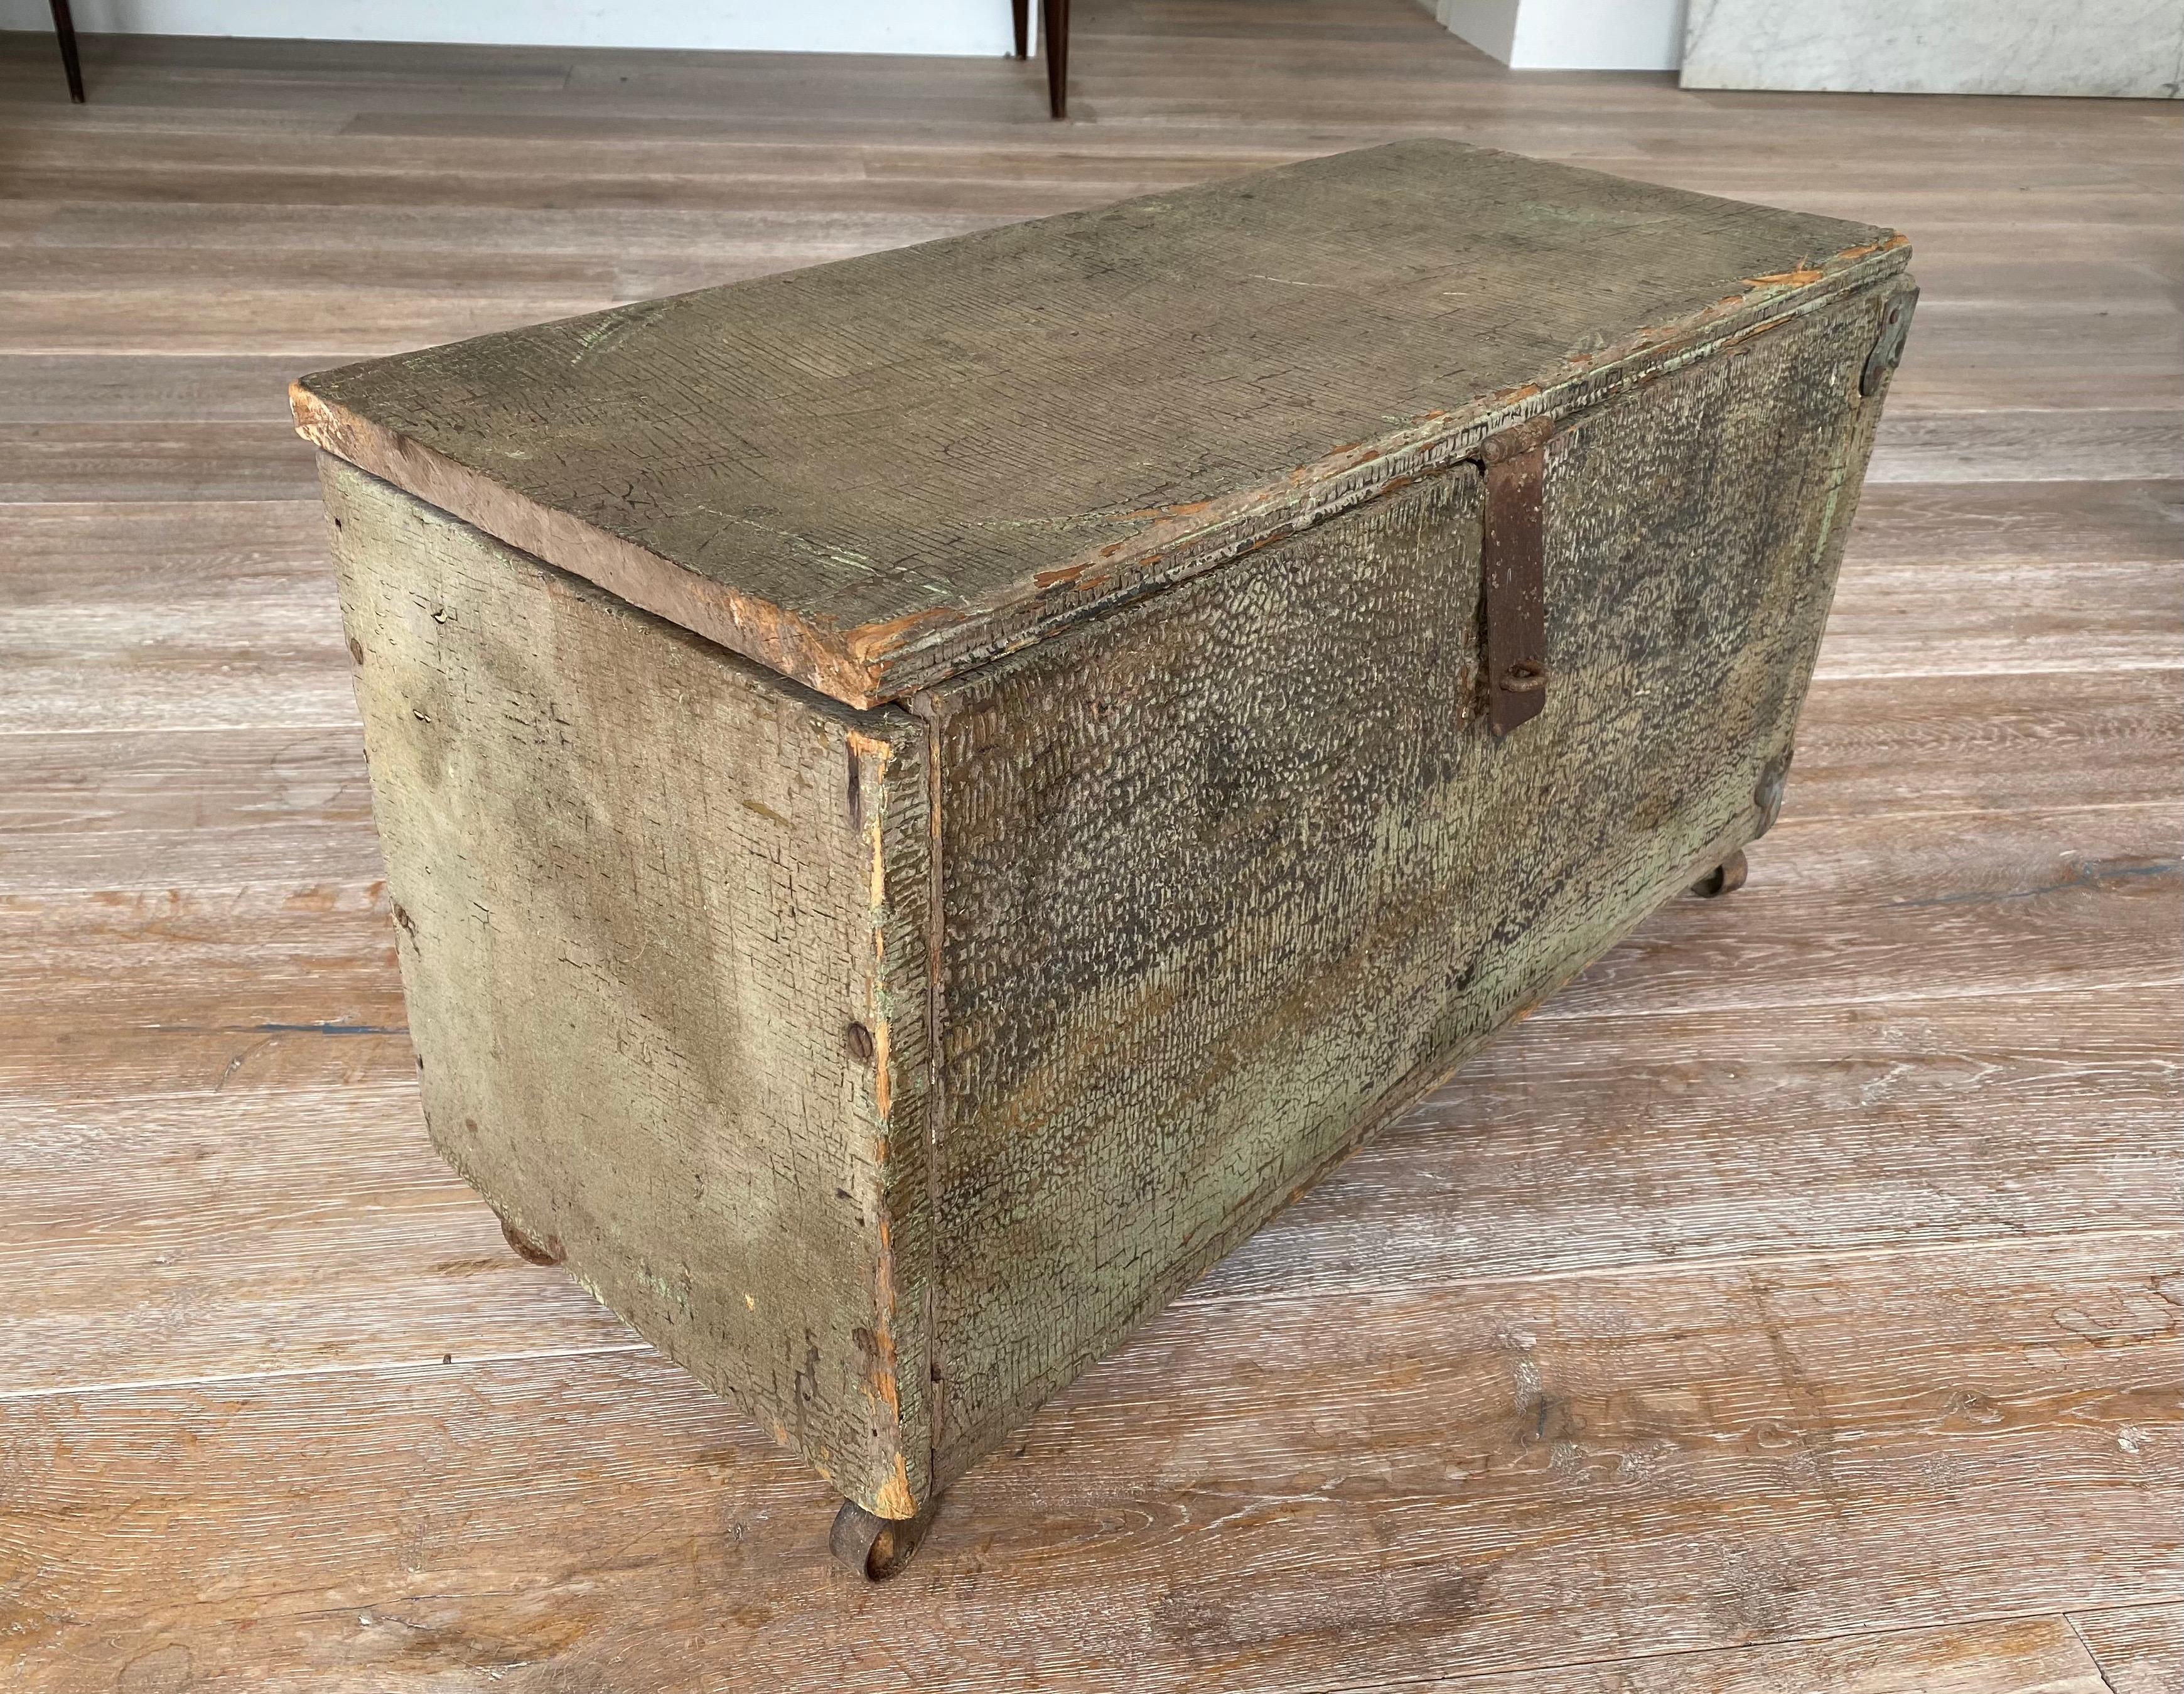 A late 19th century American lidded box with iron hardware and castors. Amazing original crackled patina to finish.